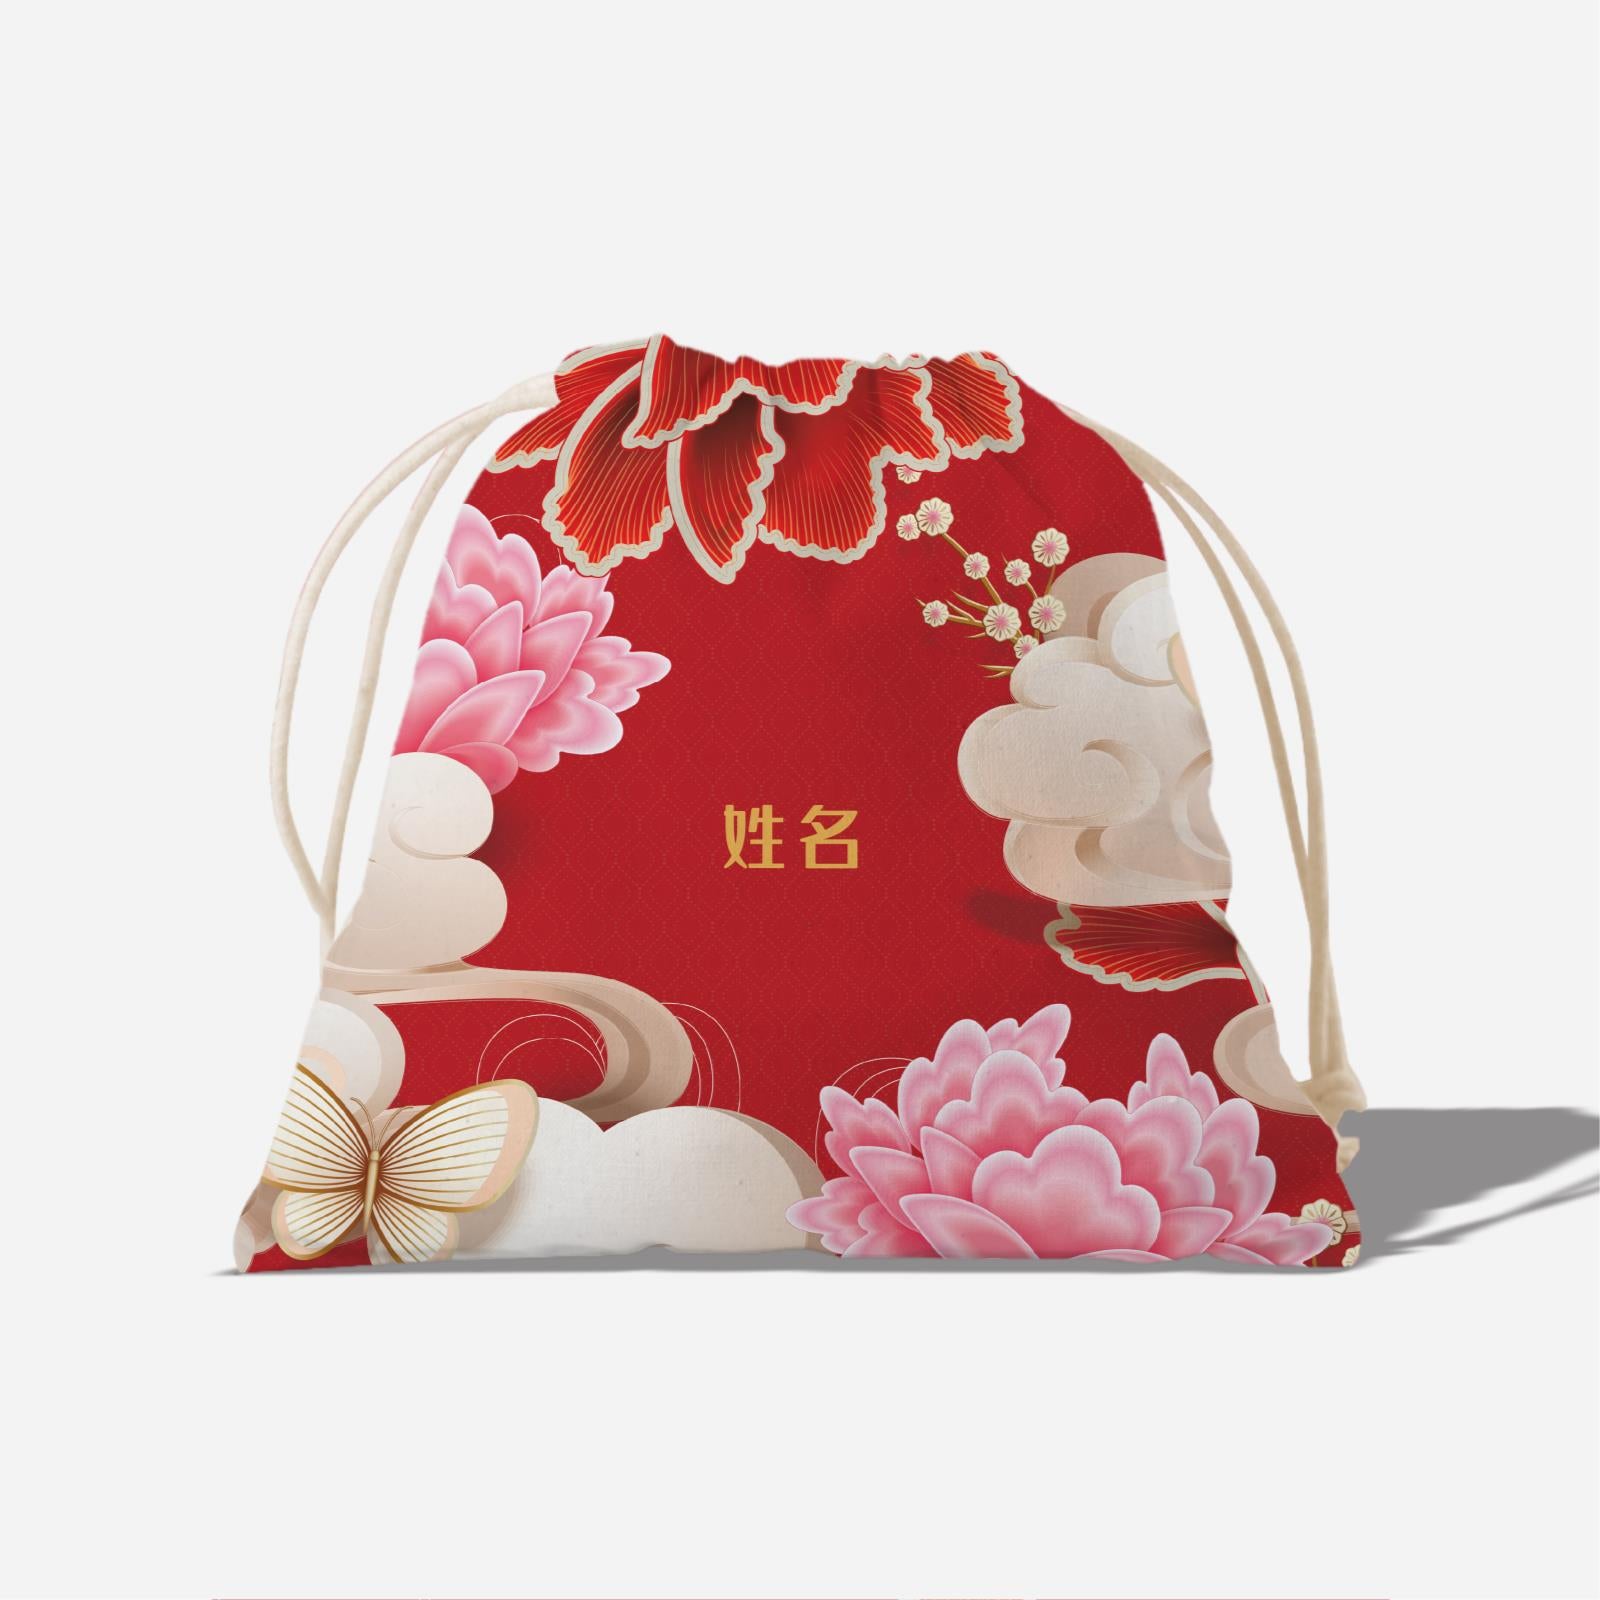 Endless Flourish Series - Red Full Print Satchel With Chinese Personalization